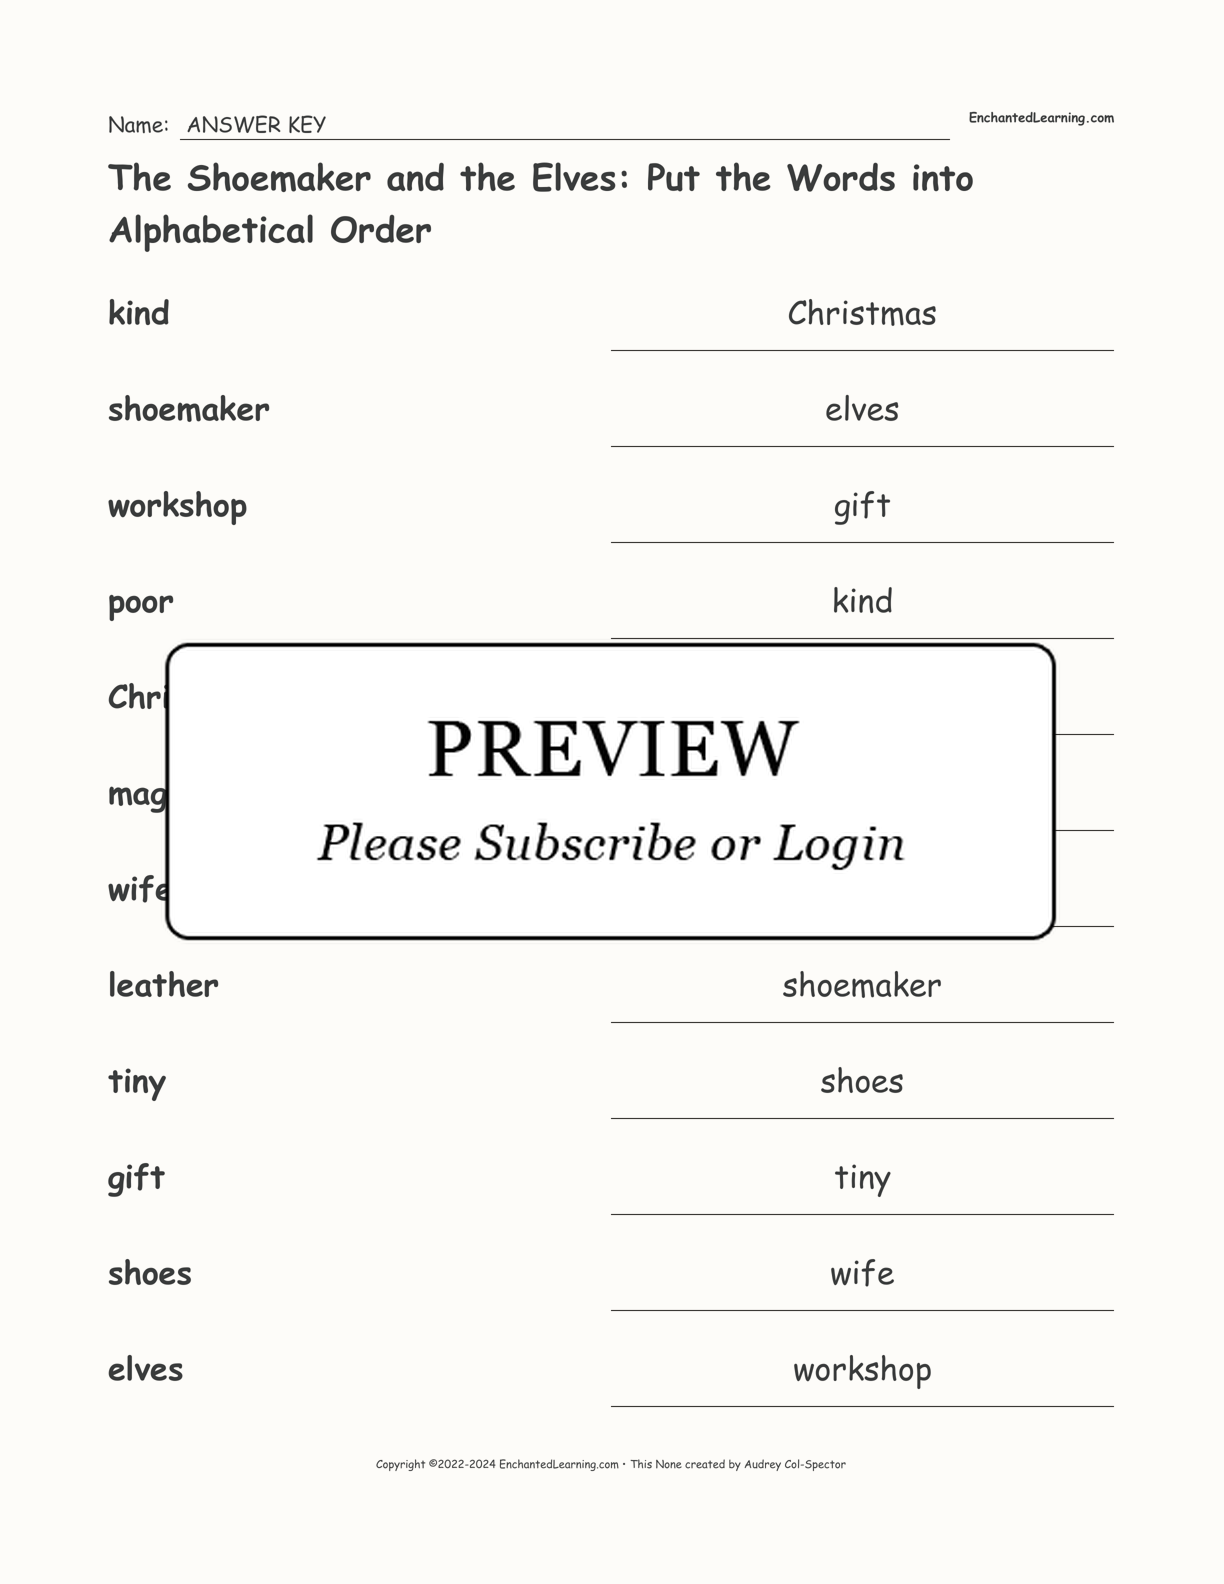 The Shoemaker and the Elves: Put the Words into Alphabetical Order interactive worksheet page 2